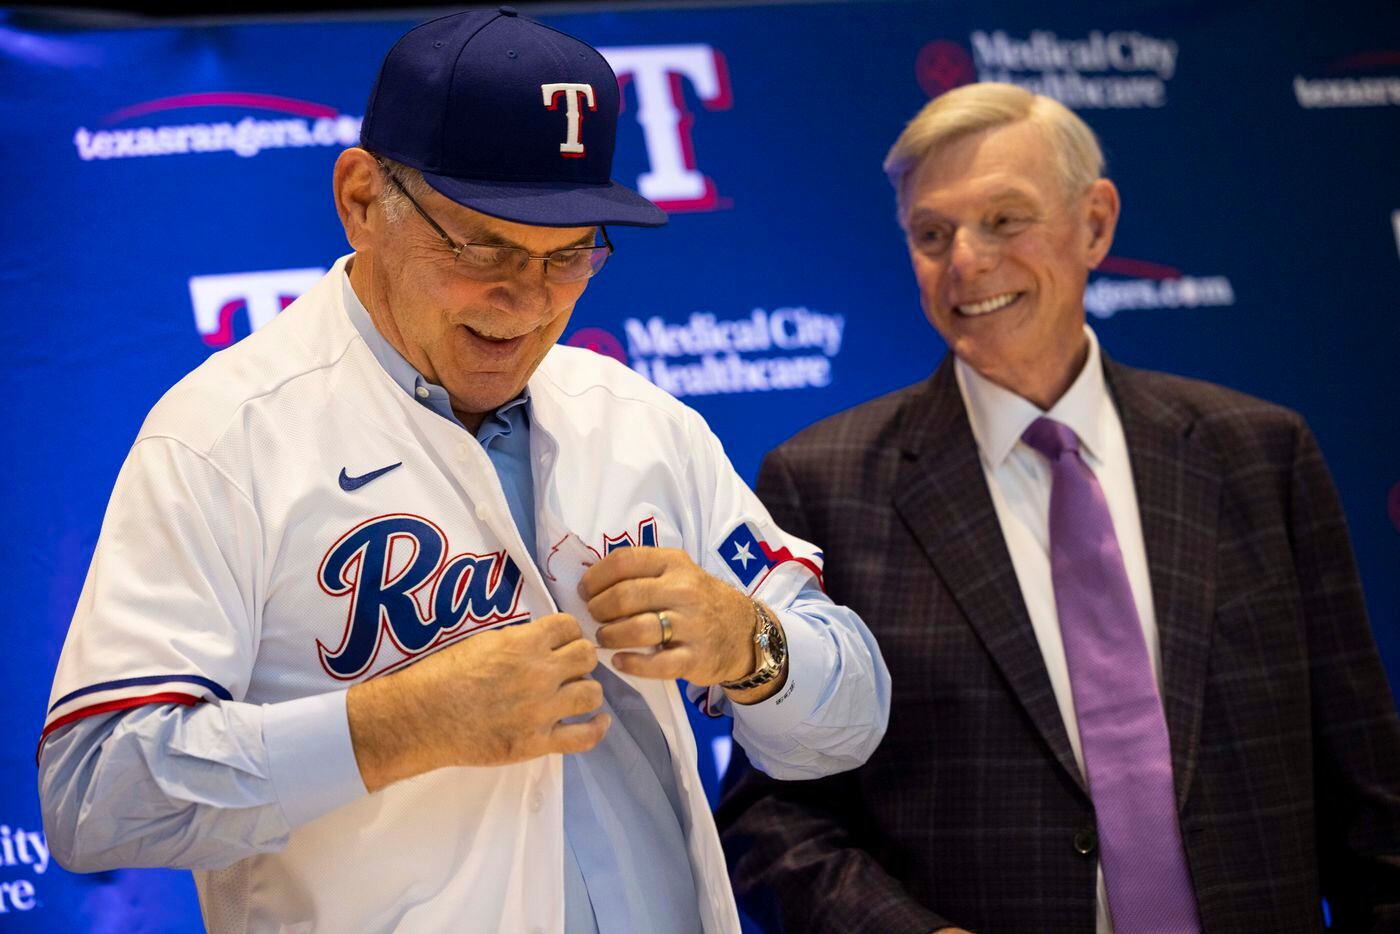 Texas Rangers owner Ray Davis (right) smiles as new Texas Rangers manager Bruce Bochy puts...